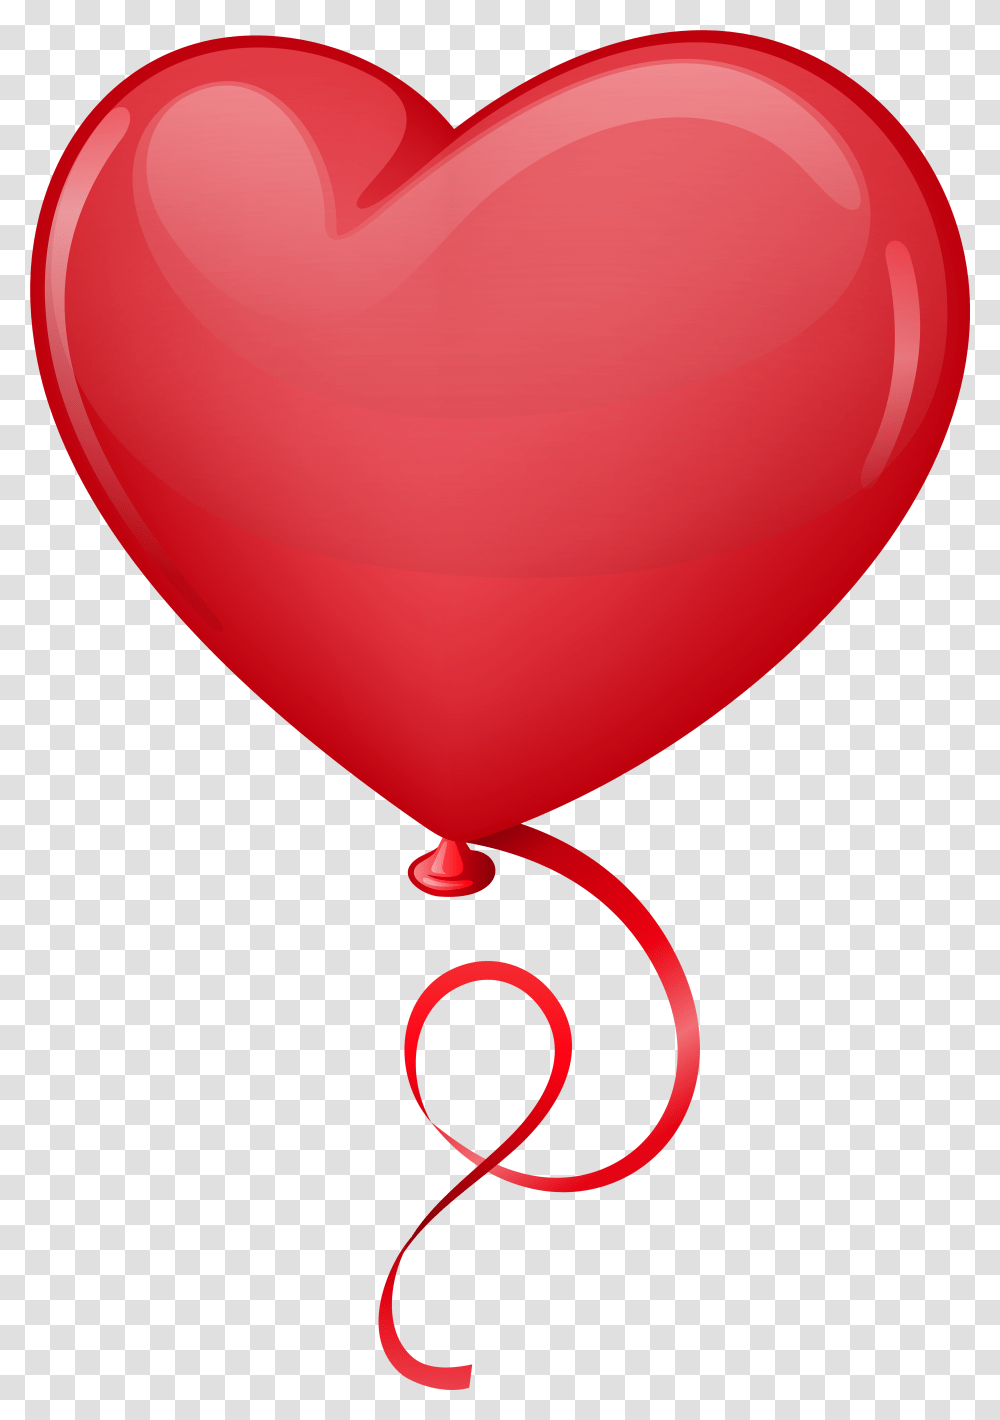 Image Of Red Heart Red Heart Balloon Cartoon Transparent Png